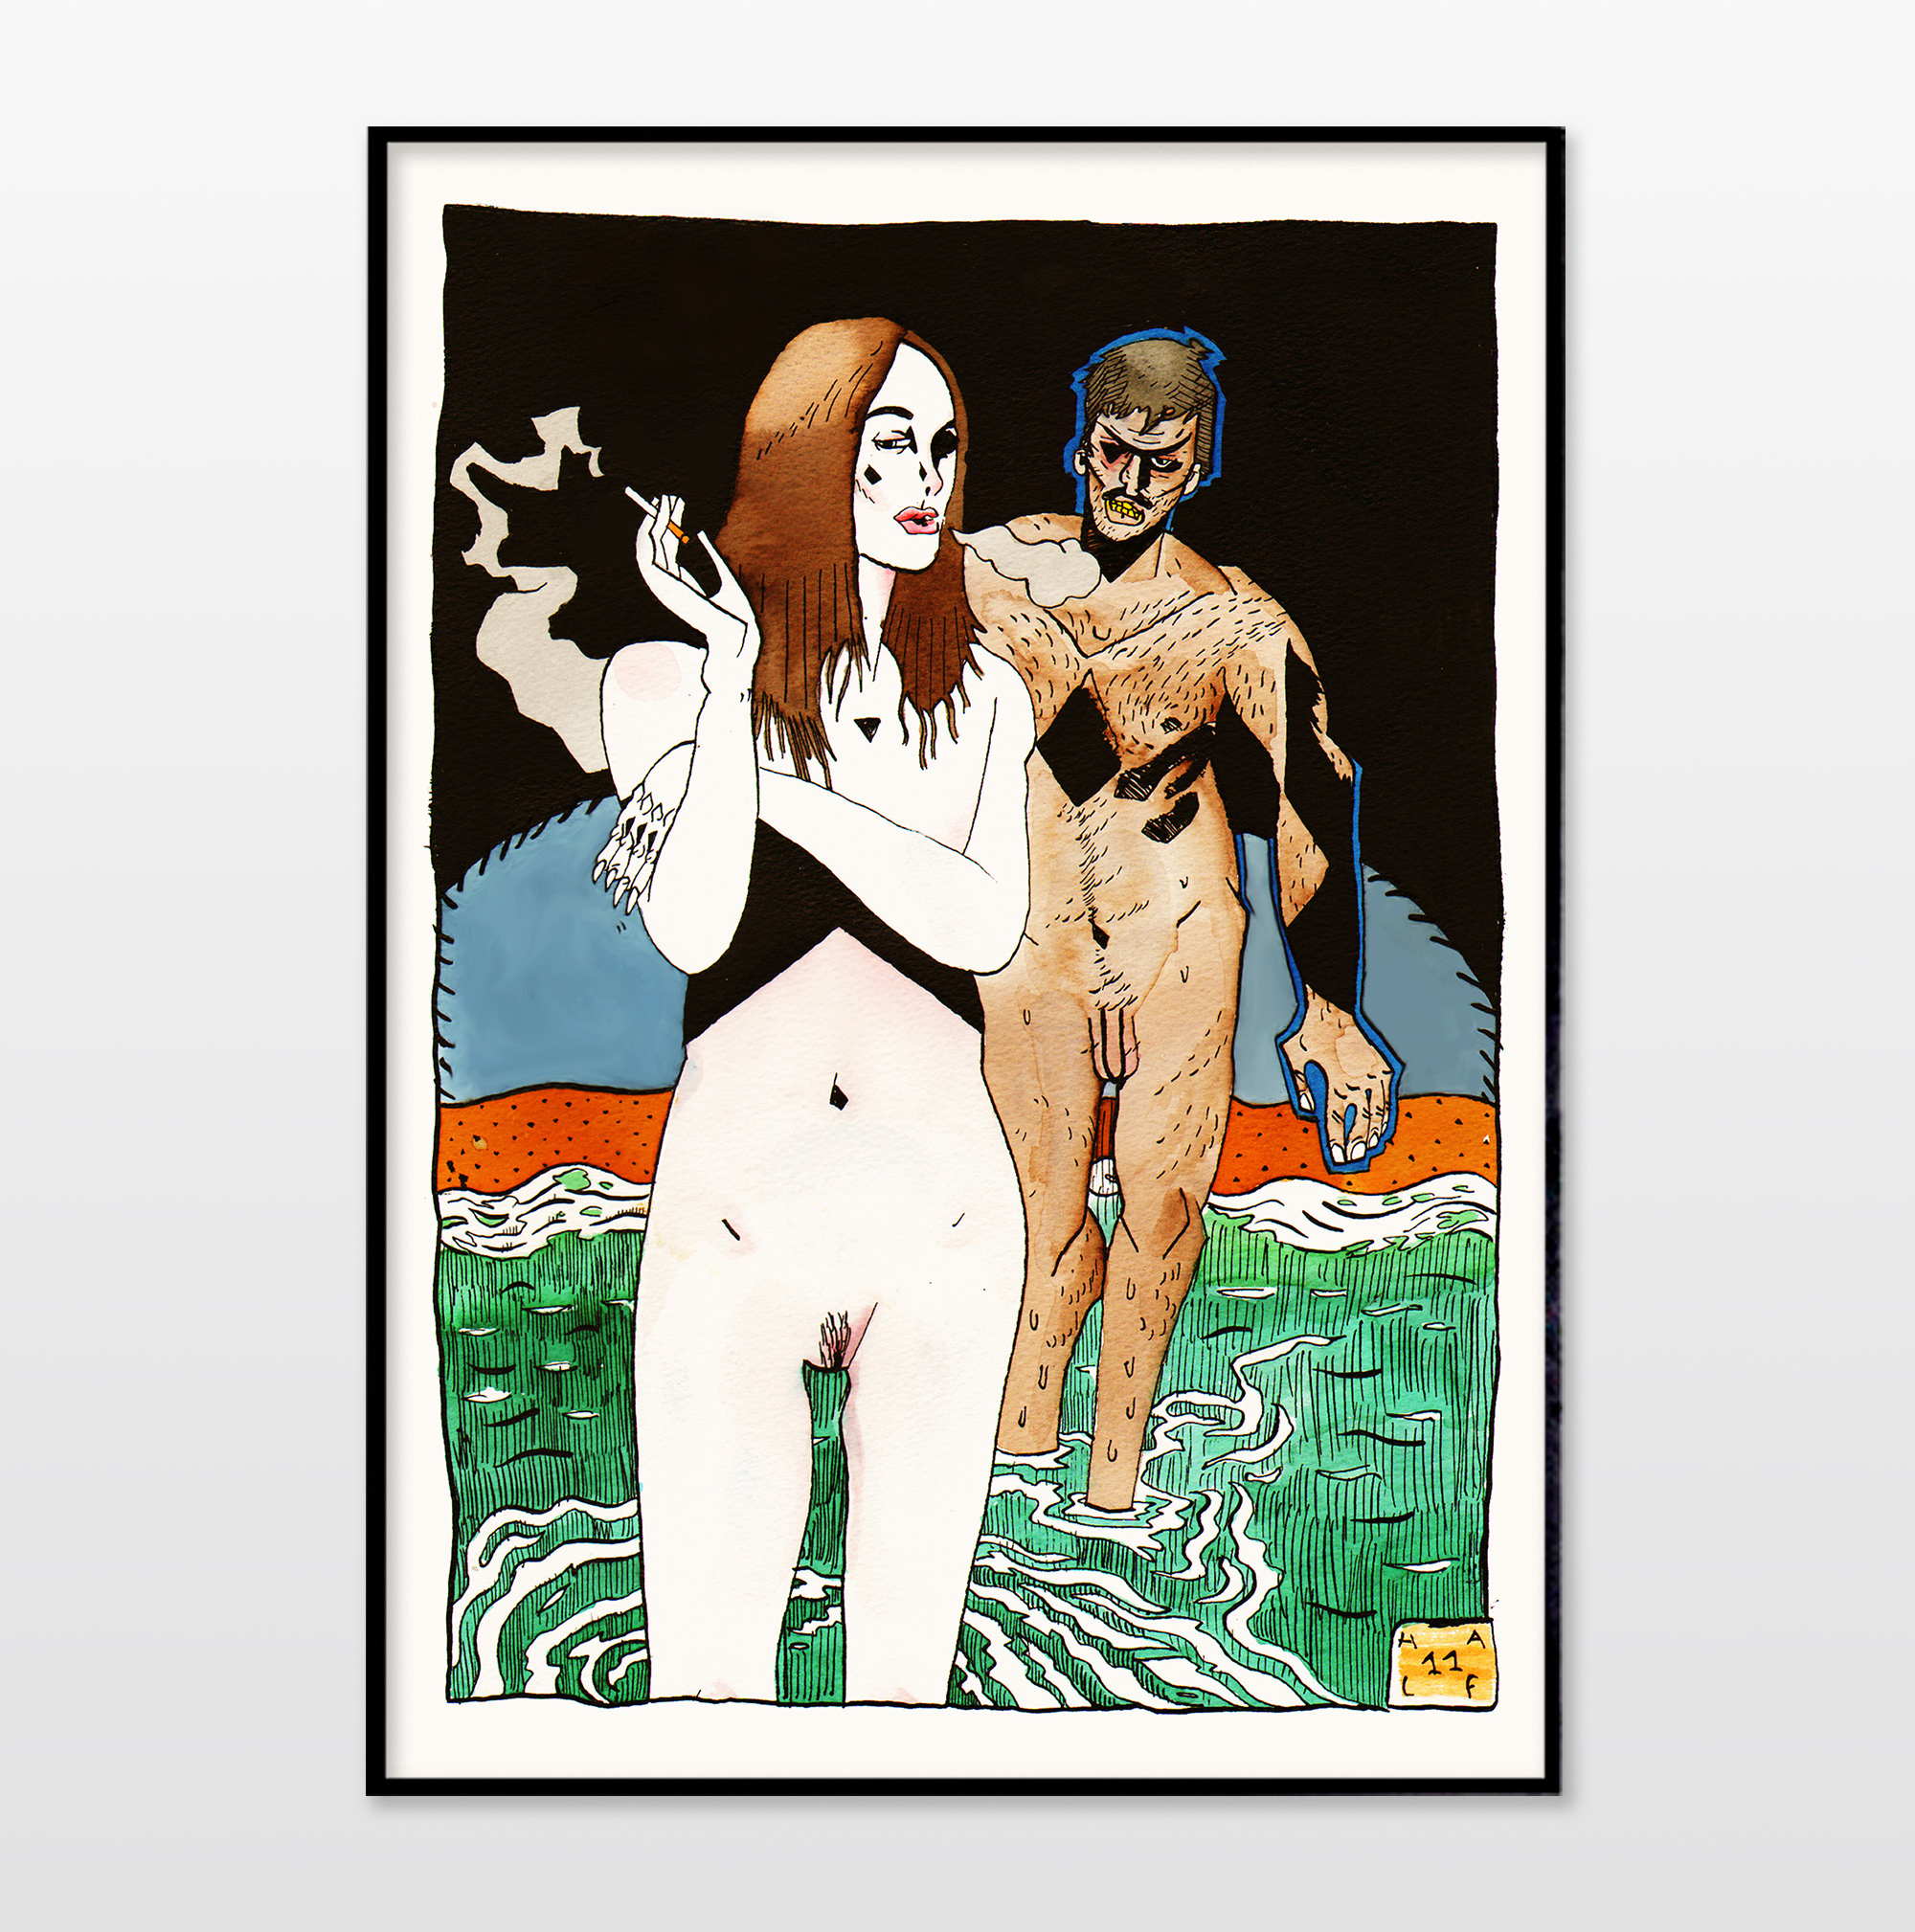 posters-prints, giclee-print, figurative, graphical, illustrative, portraiture, bodies, cartoons, people, sexuality, black, blue, brown, green, orange, ink, paper, contemporary-art, danish, decorative, design, erotic, interior, interior-design, men, modern, modern-art, nordic, nude, posters, scandinavien, sexual, sketch, Buy original high quality art. Paintings, drawings, limited edition prints & posters by talented artists.